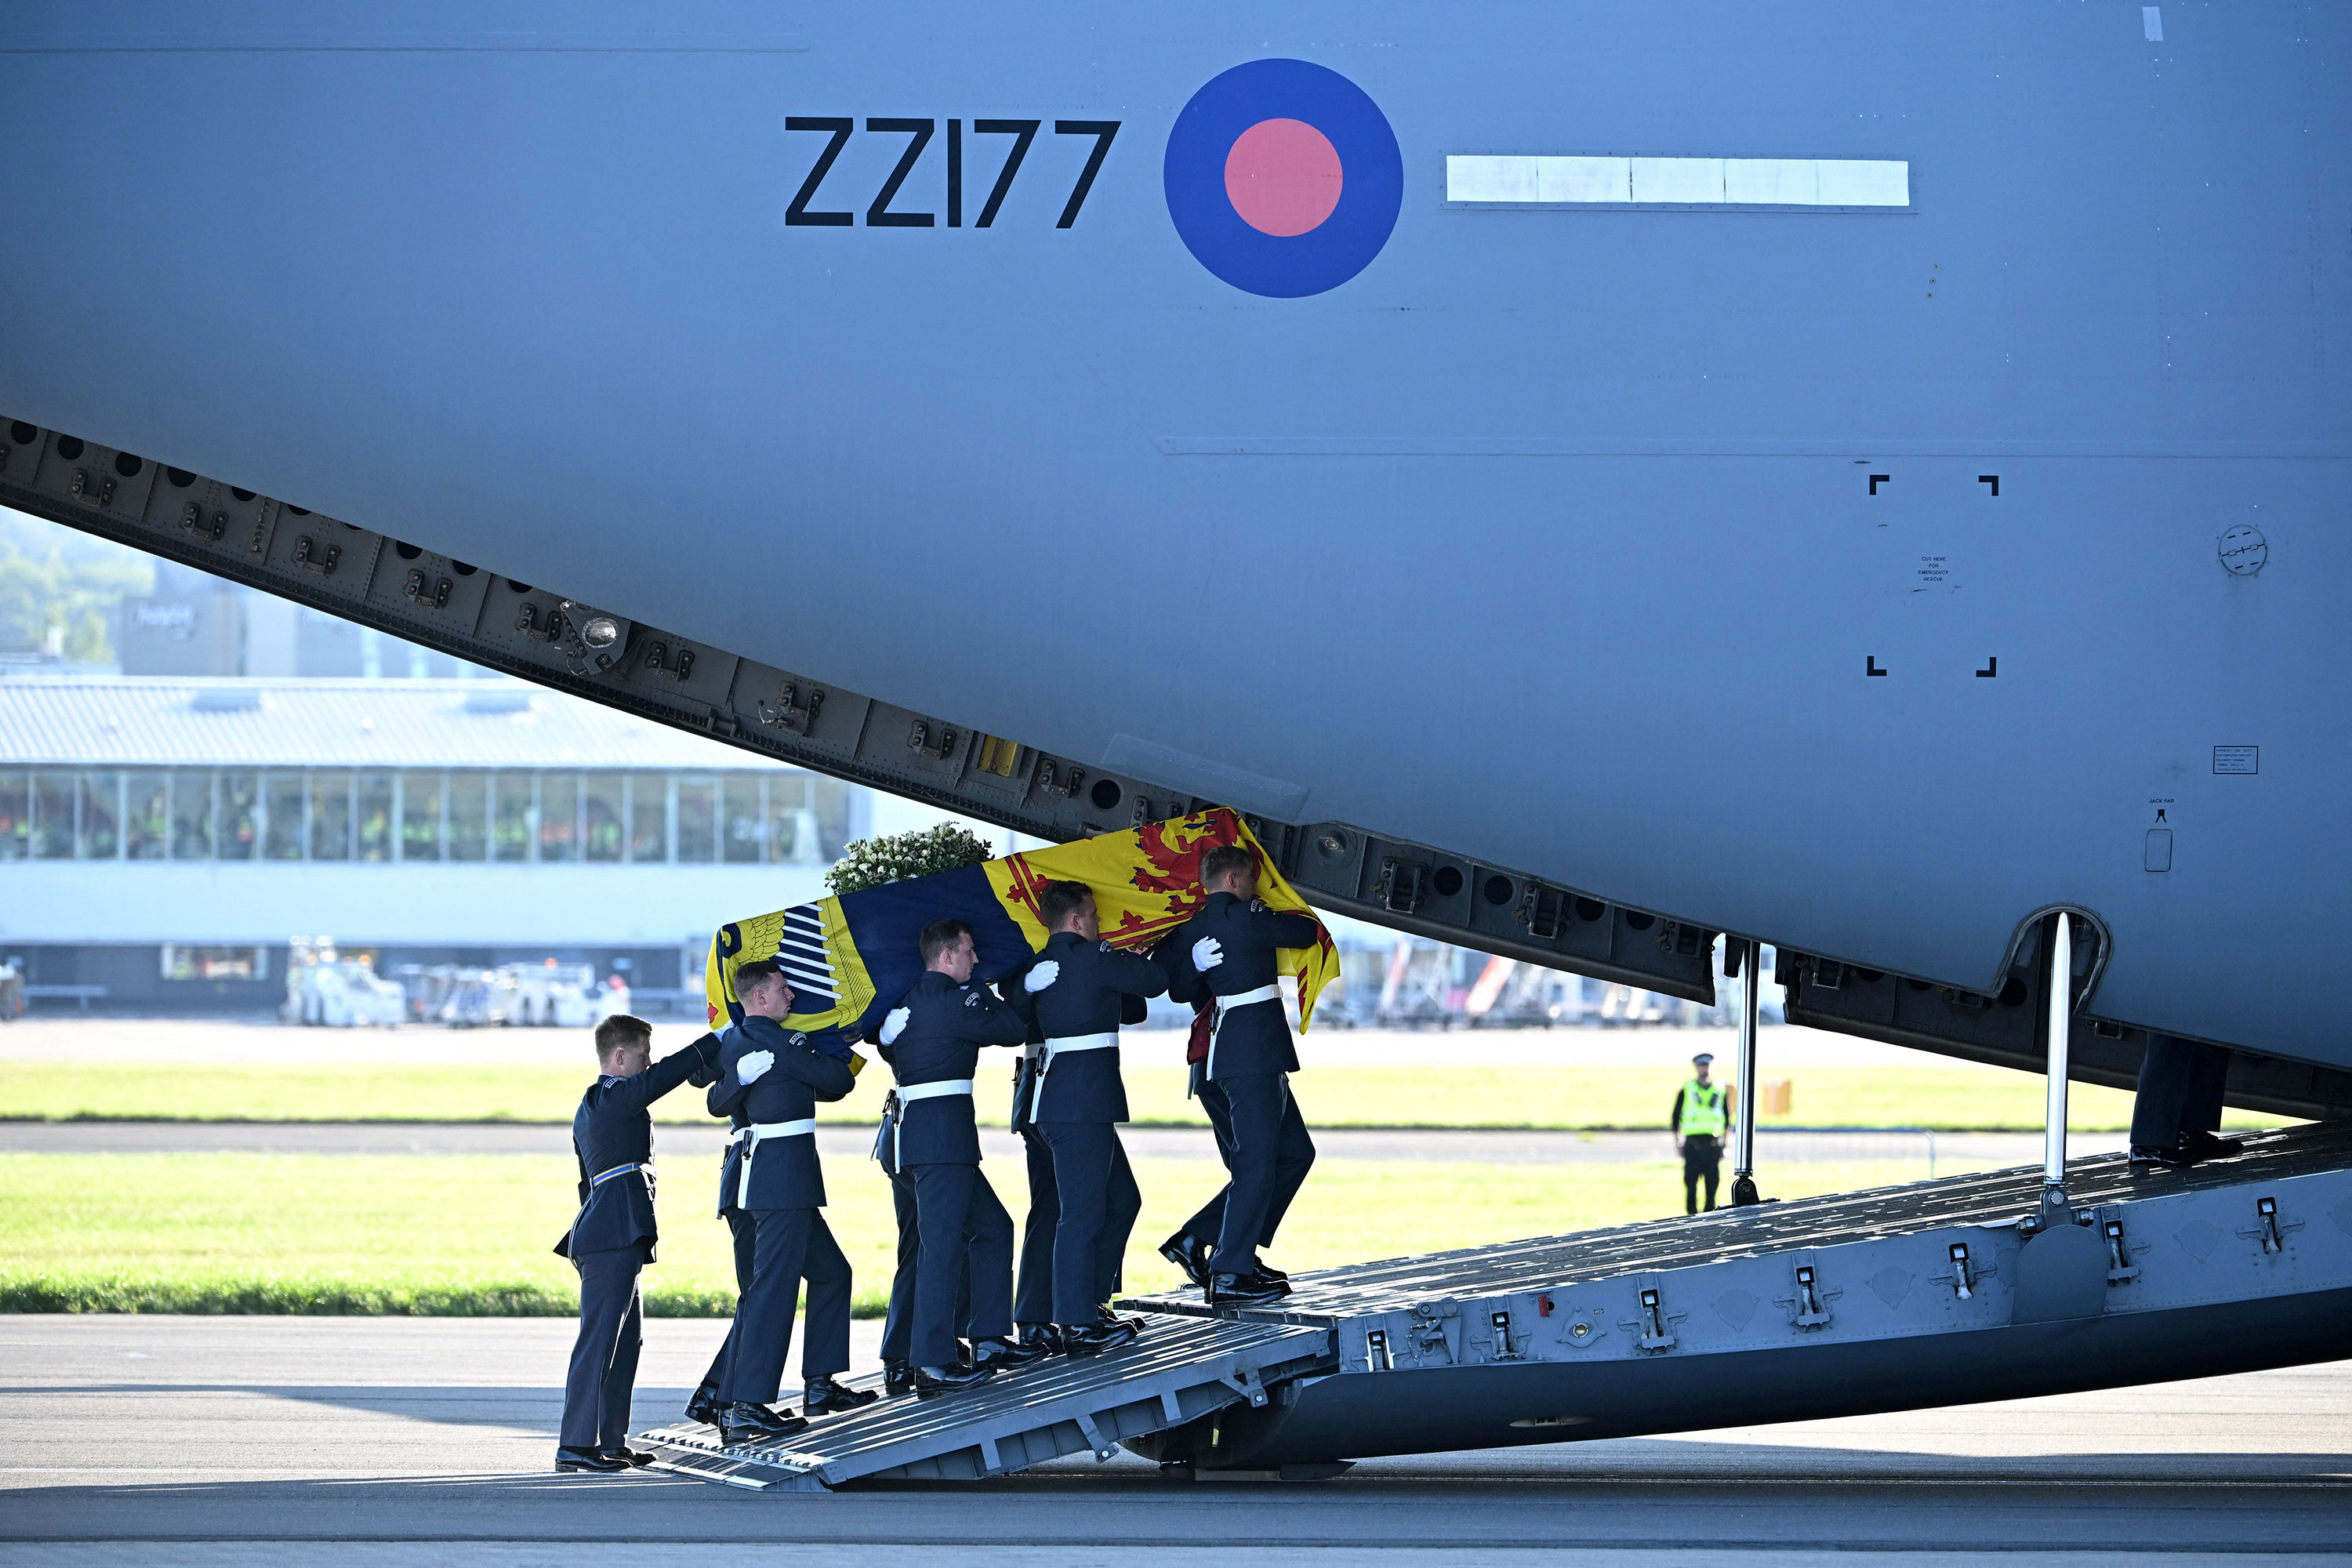 Pallbearers from the Queen's Colour Squadron of the Royal Air Force carry the coffin of Queen Elizabeth into a RAF-C17 aircraft at Edinburgh airport on Tuesday.